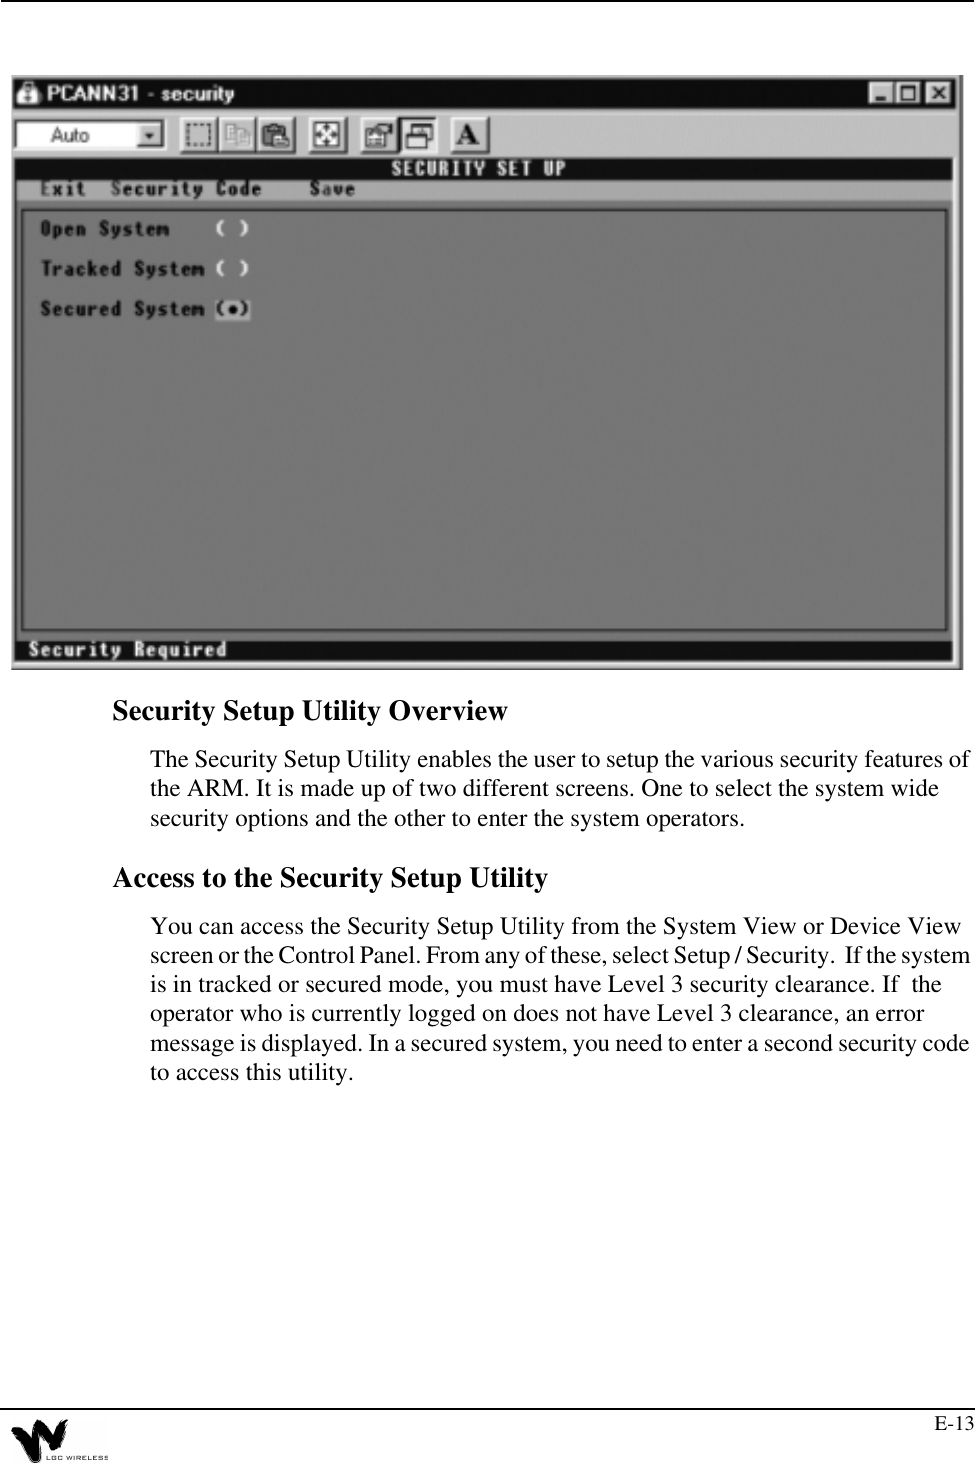 E-13Security Setup Utility OverviewThe Security Setup Utility enables the user to setup the various security features of the ARM. It is made up of two different screens. One to select the system wide security options and the other to enter the system operators.Access to the Security Setup UtilityYou can access the Security Setup Utility from the System View or Device View screen or the Control Panel. From any of these, select Setup / Security.  If the system is in tracked or secured mode, you must have Level 3 security clearance. If  the operator who is currently logged on does not have Level 3 clearance, an error message is displayed. In a secured system, you need to enter a second security code to access this utility.